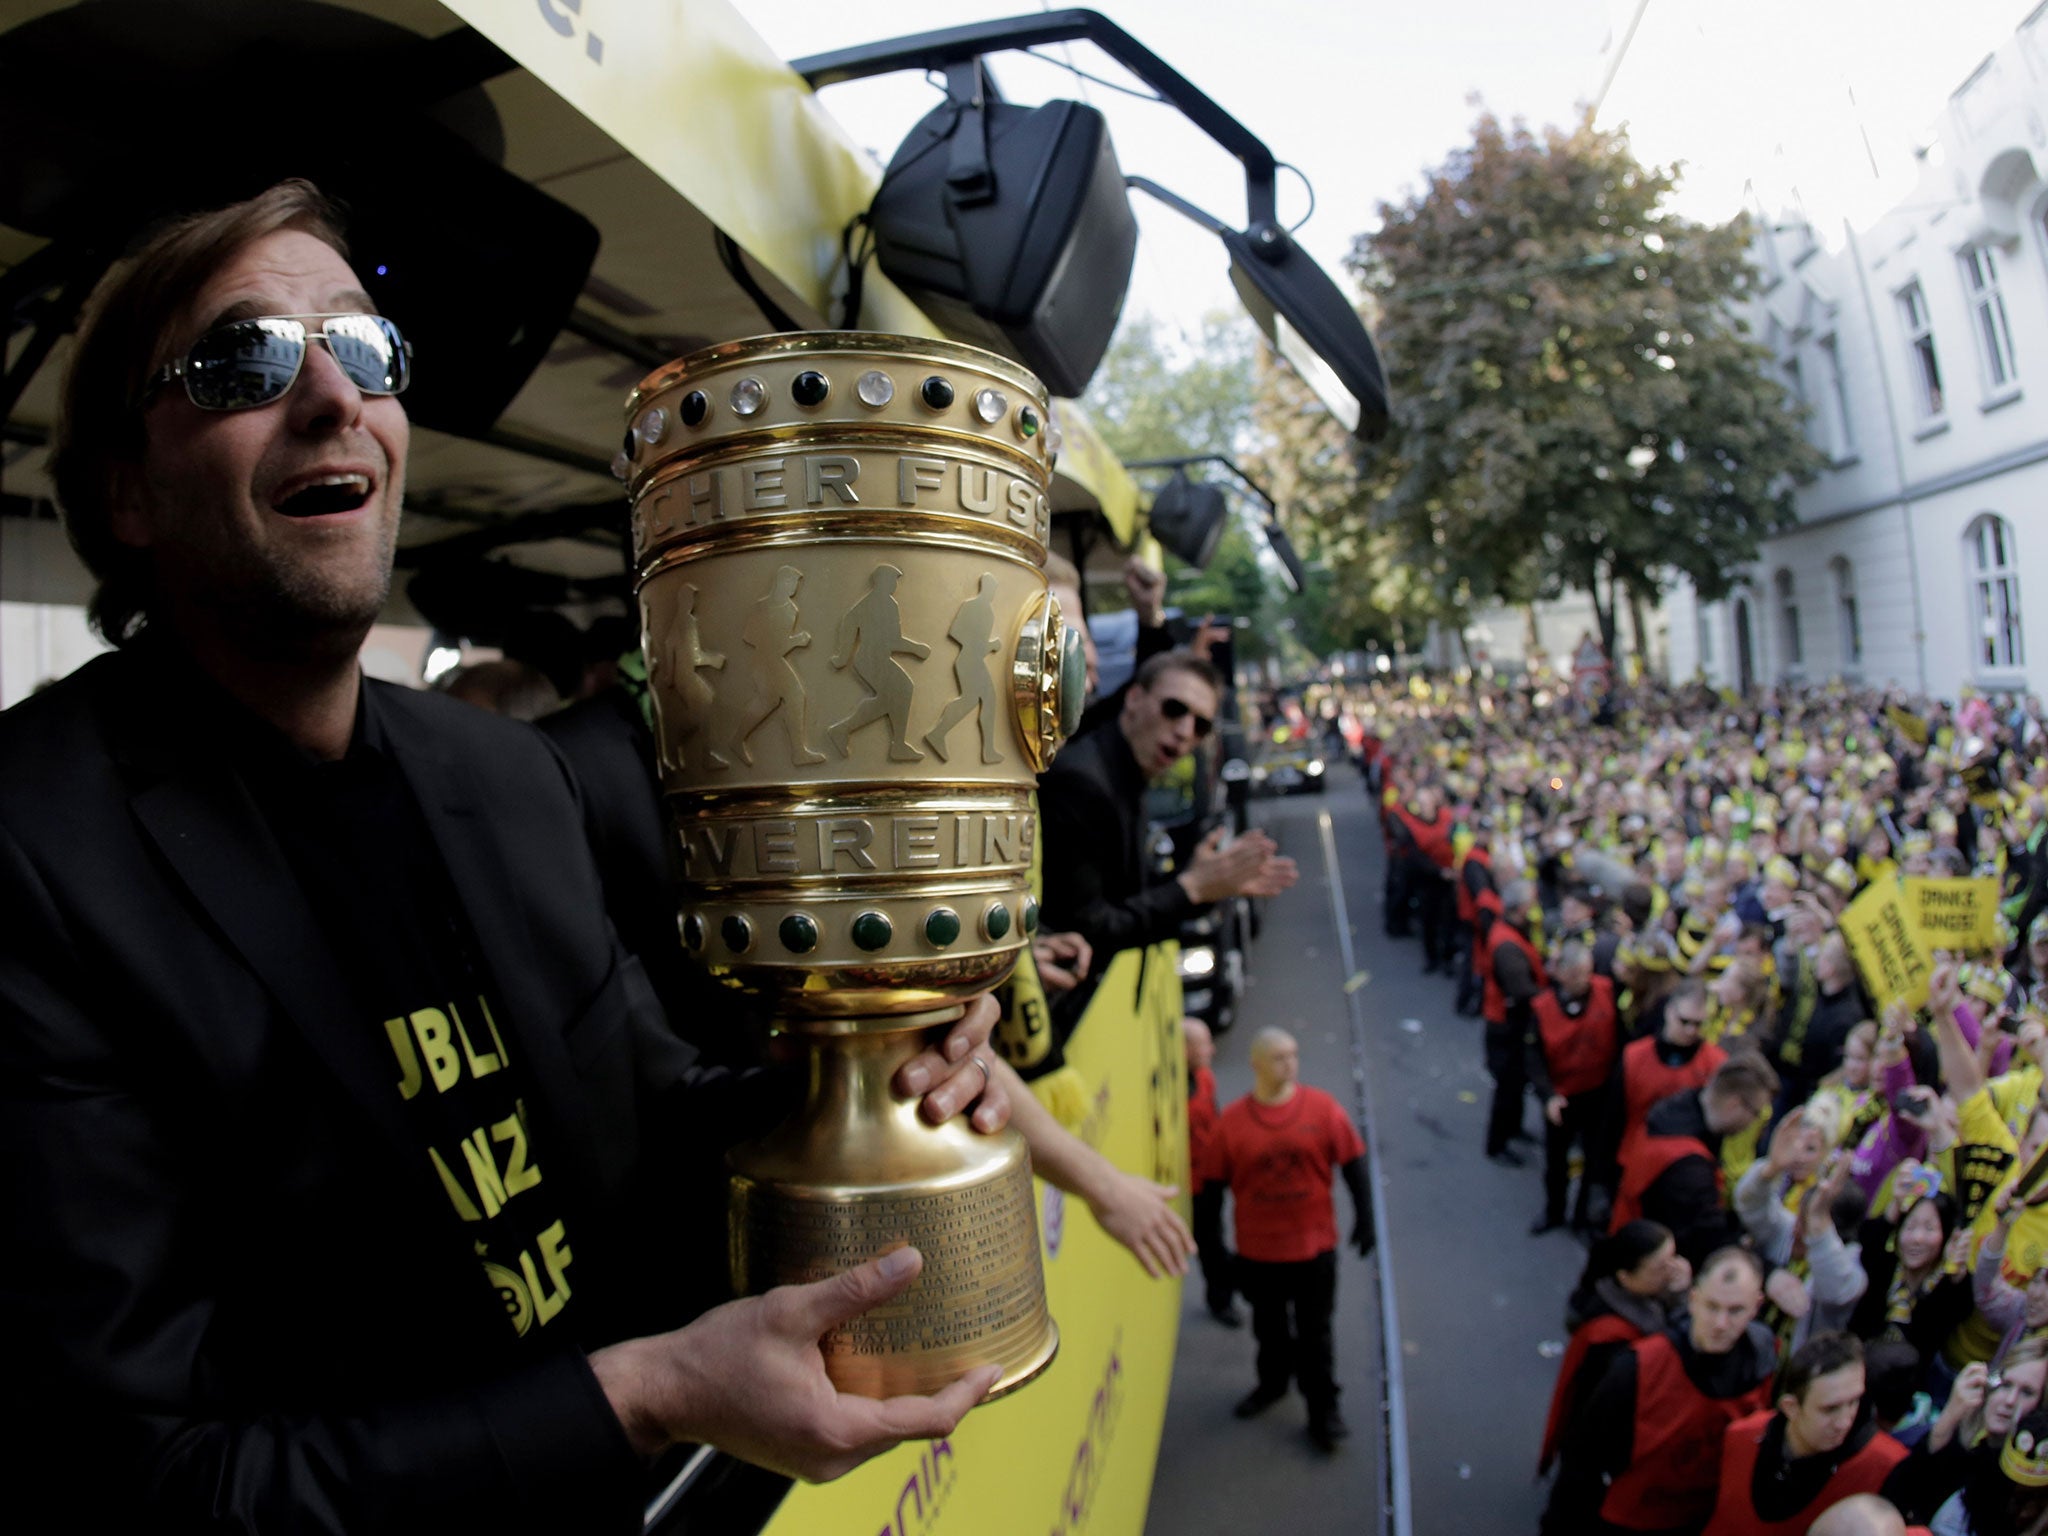 Jürgen Klopp, then Borussia Dortmund coach, during a victory parade on an open-top bus after winning the DFB Pokal – Germany’s equivalent of the FA Cup – in 2012